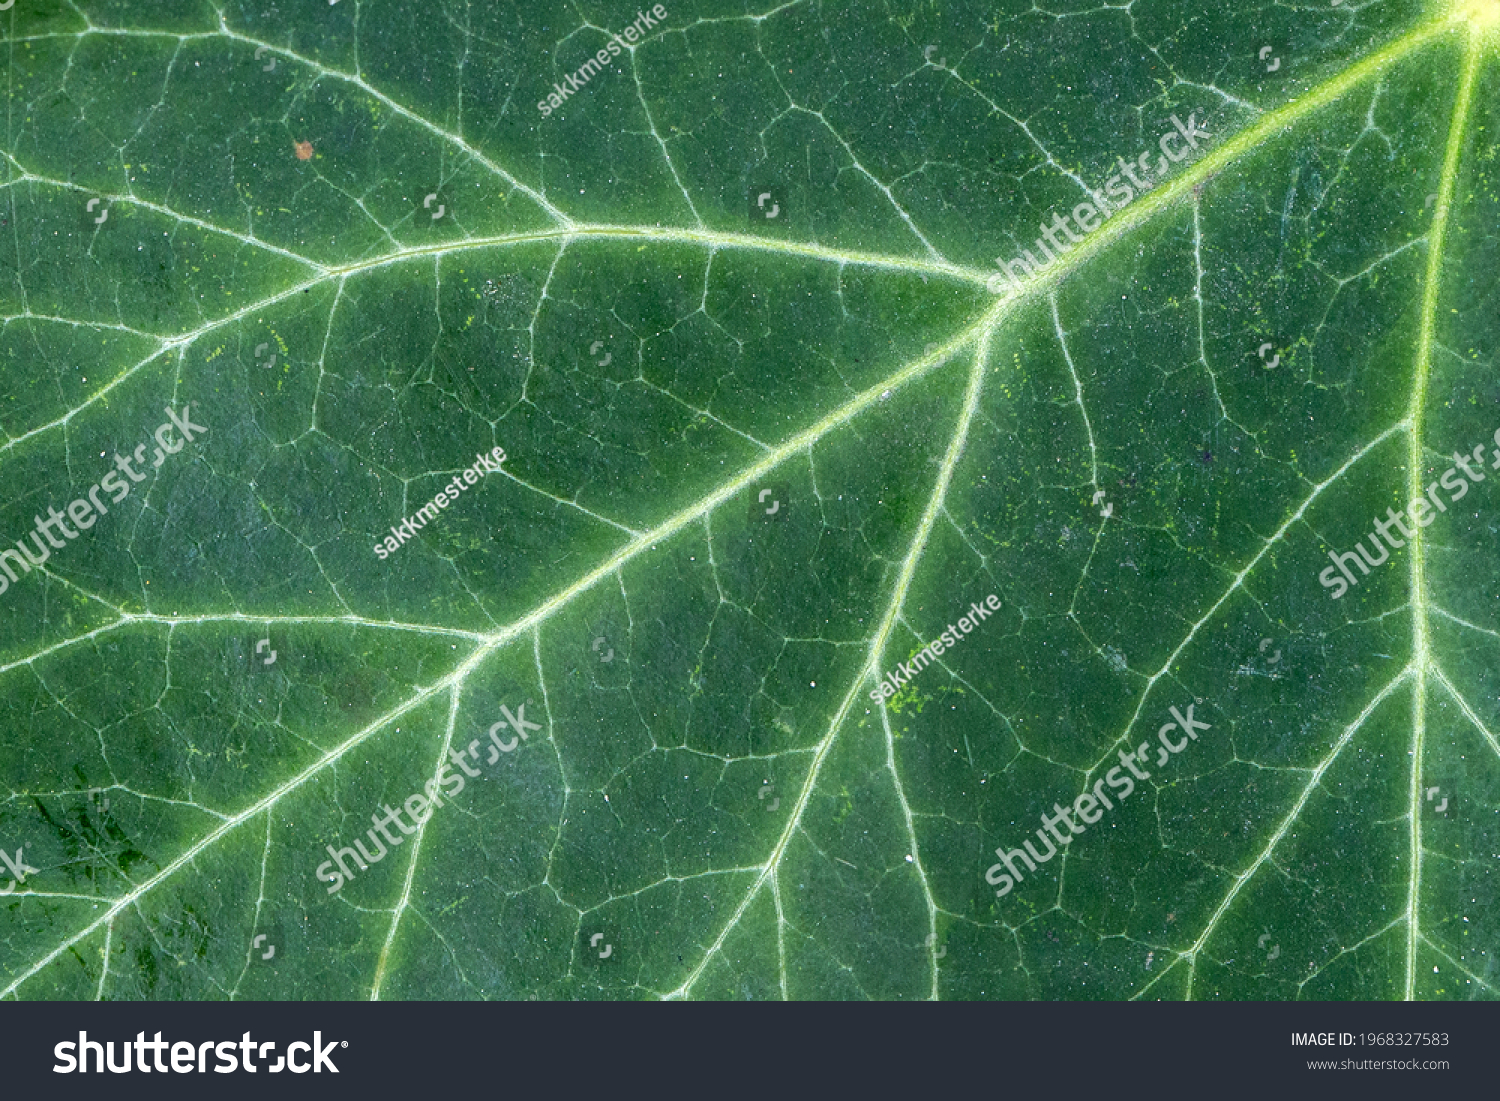 Green ivy leaf photosynthesis closeup, natural fractal pattern #1968327583